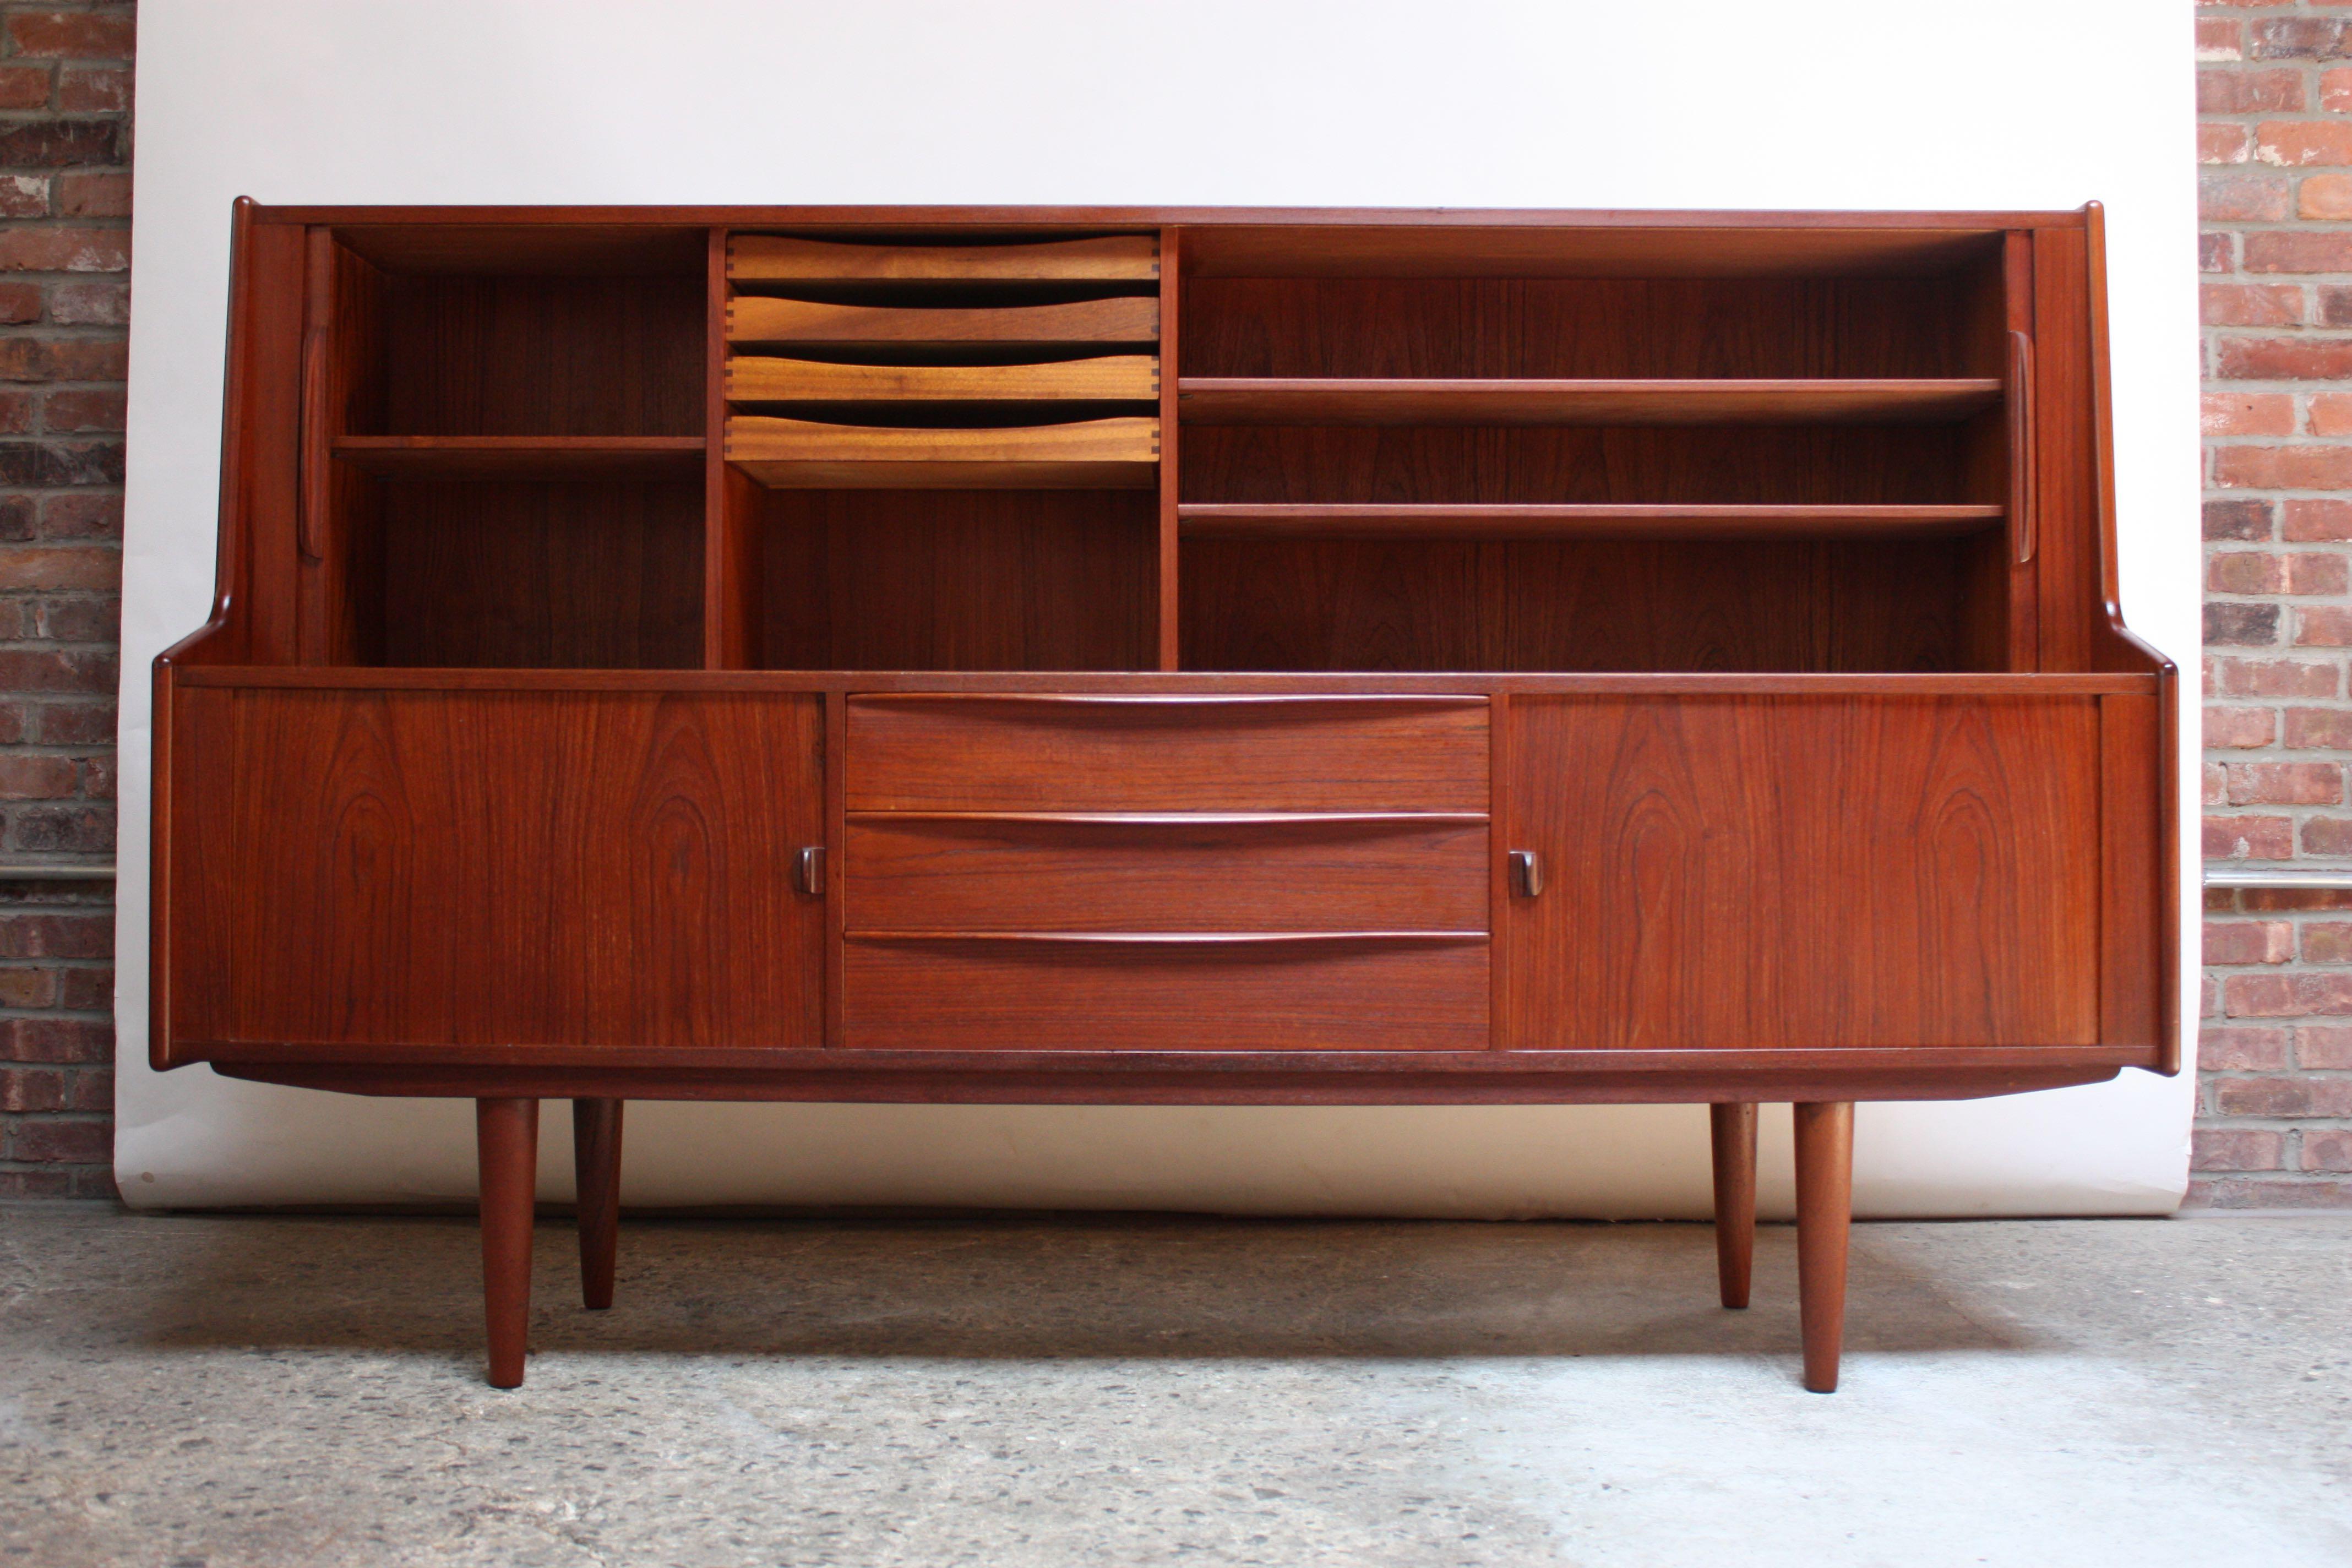 IB Kofod-Larsen highboard designed for Faarup. Early example (1950s) in dark teak with multiple storage compartments. Narrow profile and relatively diminutive size for its design / storage capability. Top two tambour doors open to reveal two